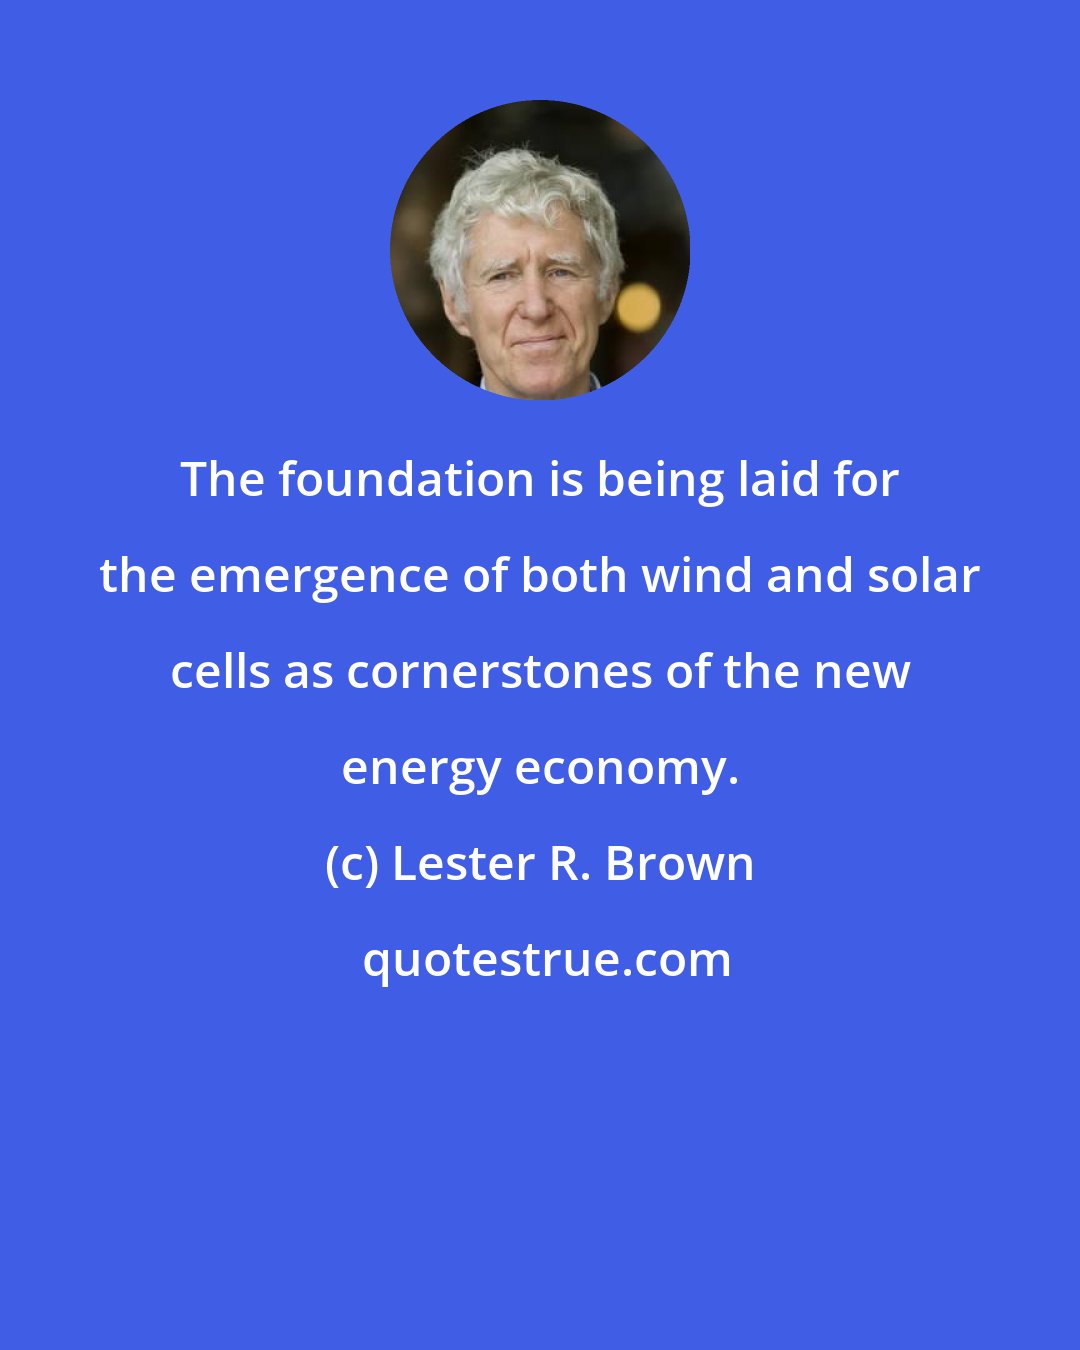 Lester R. Brown: The foundation is being laid for the emergence of both wind and solar cells as cornerstones of the new energy economy.